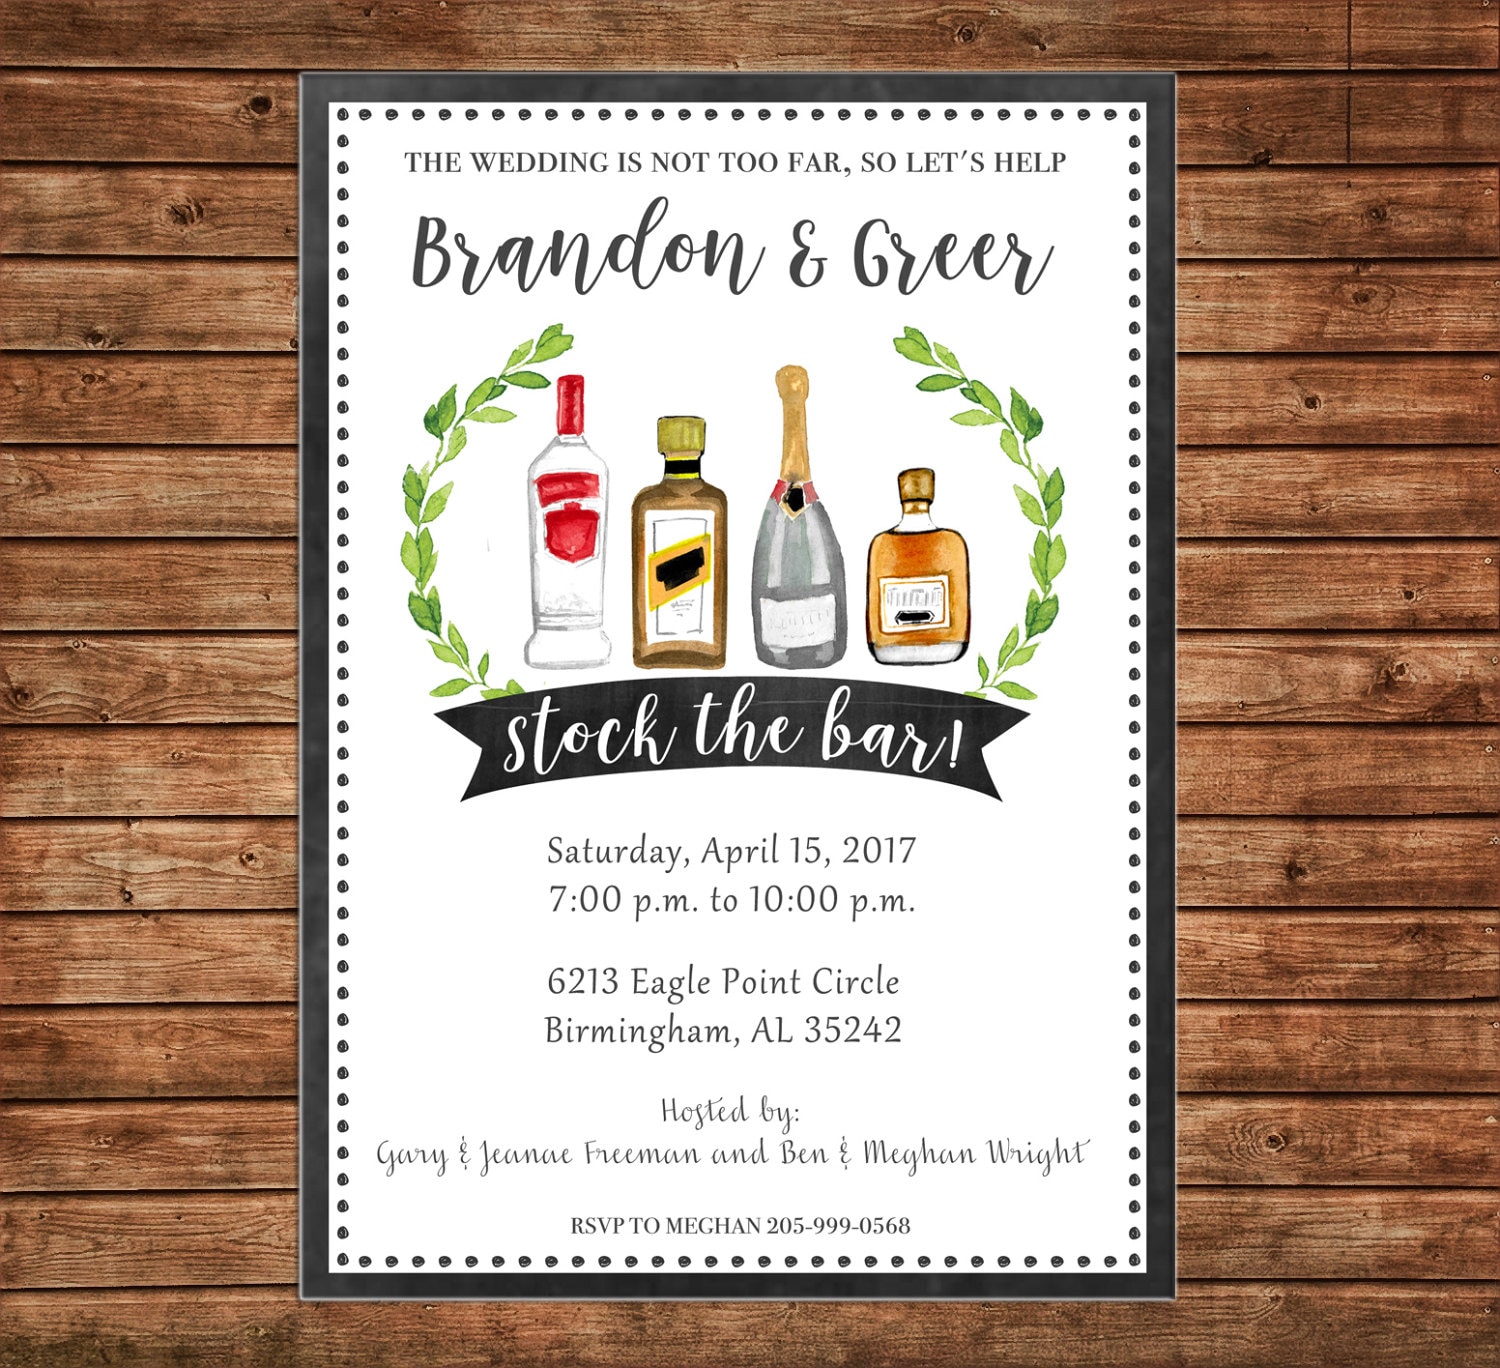 Invitation Stock the Bar Watercolor Wedding Bridal Shower Party - Can personalize colors